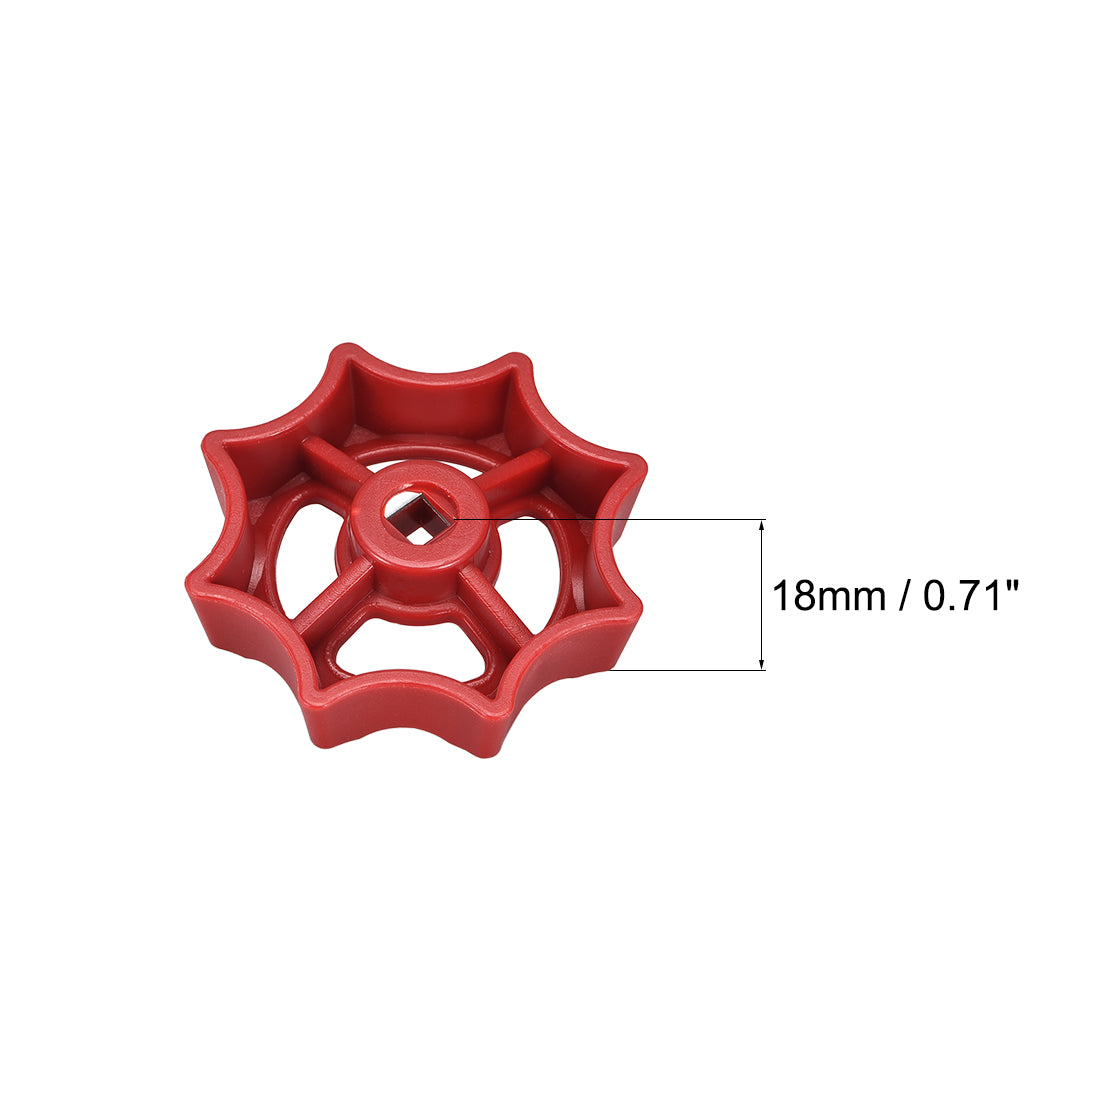 Uxcell Uxcell Round Wheel Handle, Square Broach 6x6mm, Wheel OD 63mm ABS Red 2Pcs